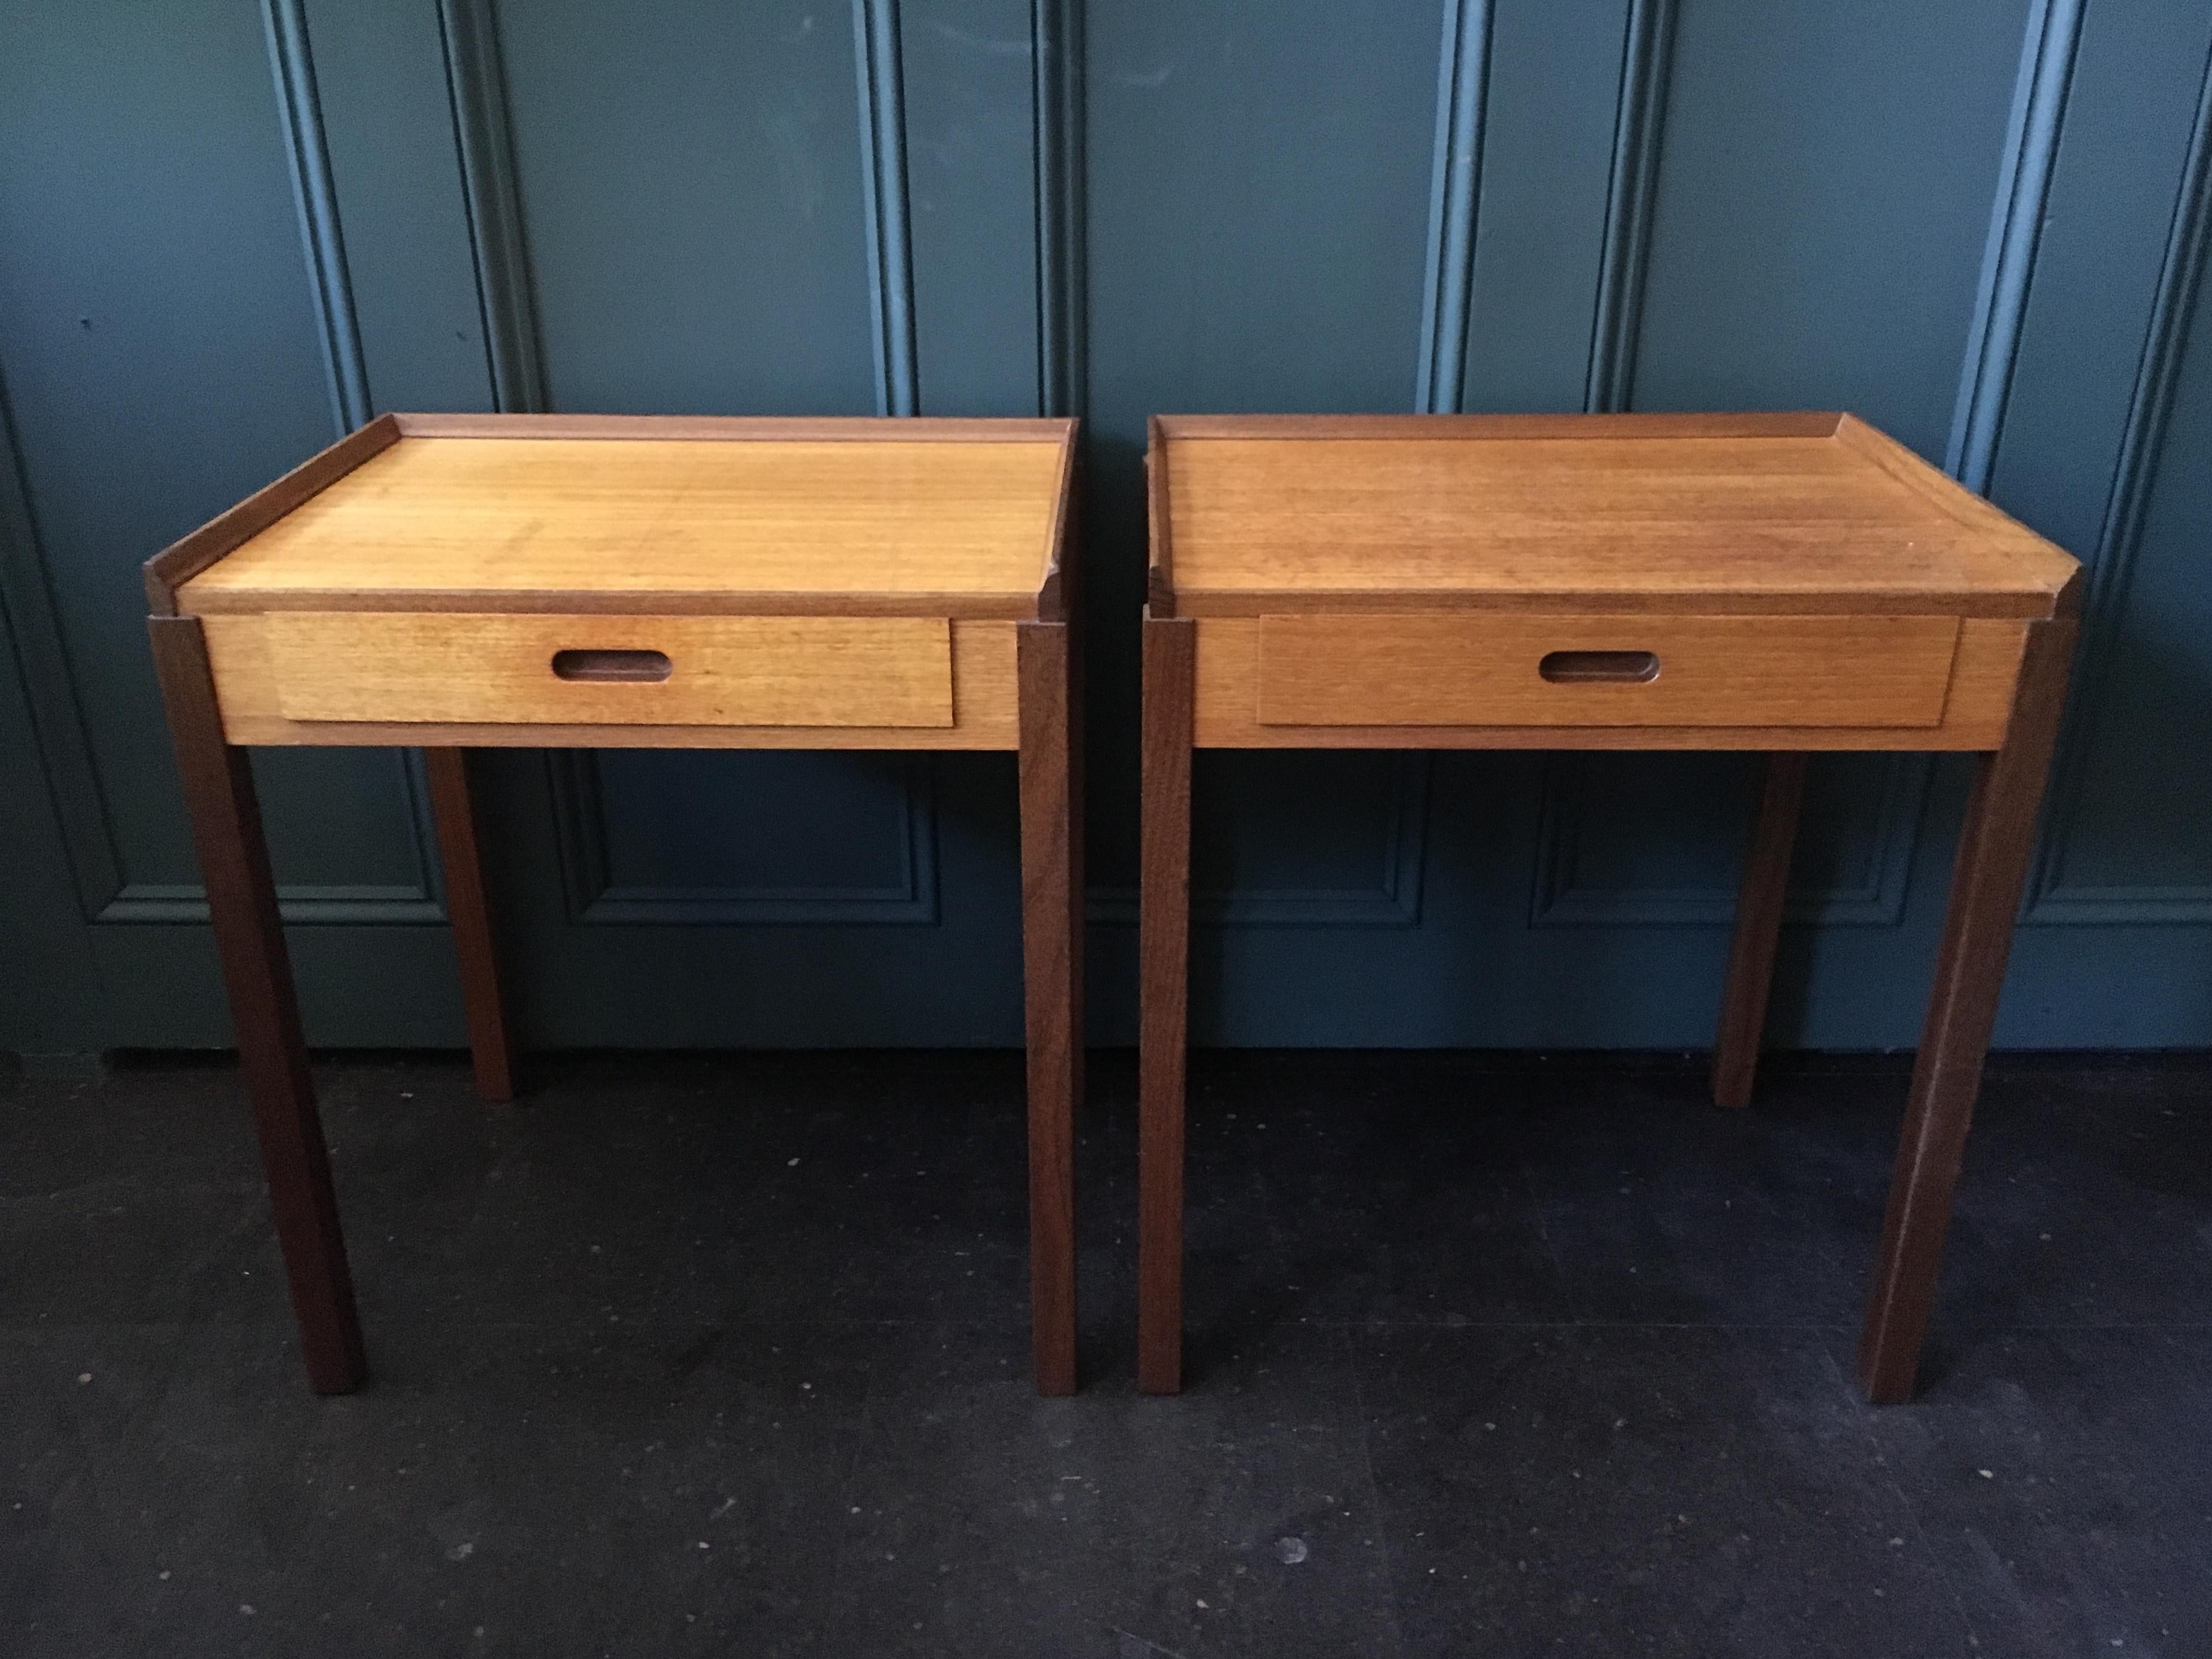 Superb pair of modernist bedside tables. These Danish midcentury nightstands are constructed from teak and were produced in the early 1960s. In great condition. Pure Scandinavian design.